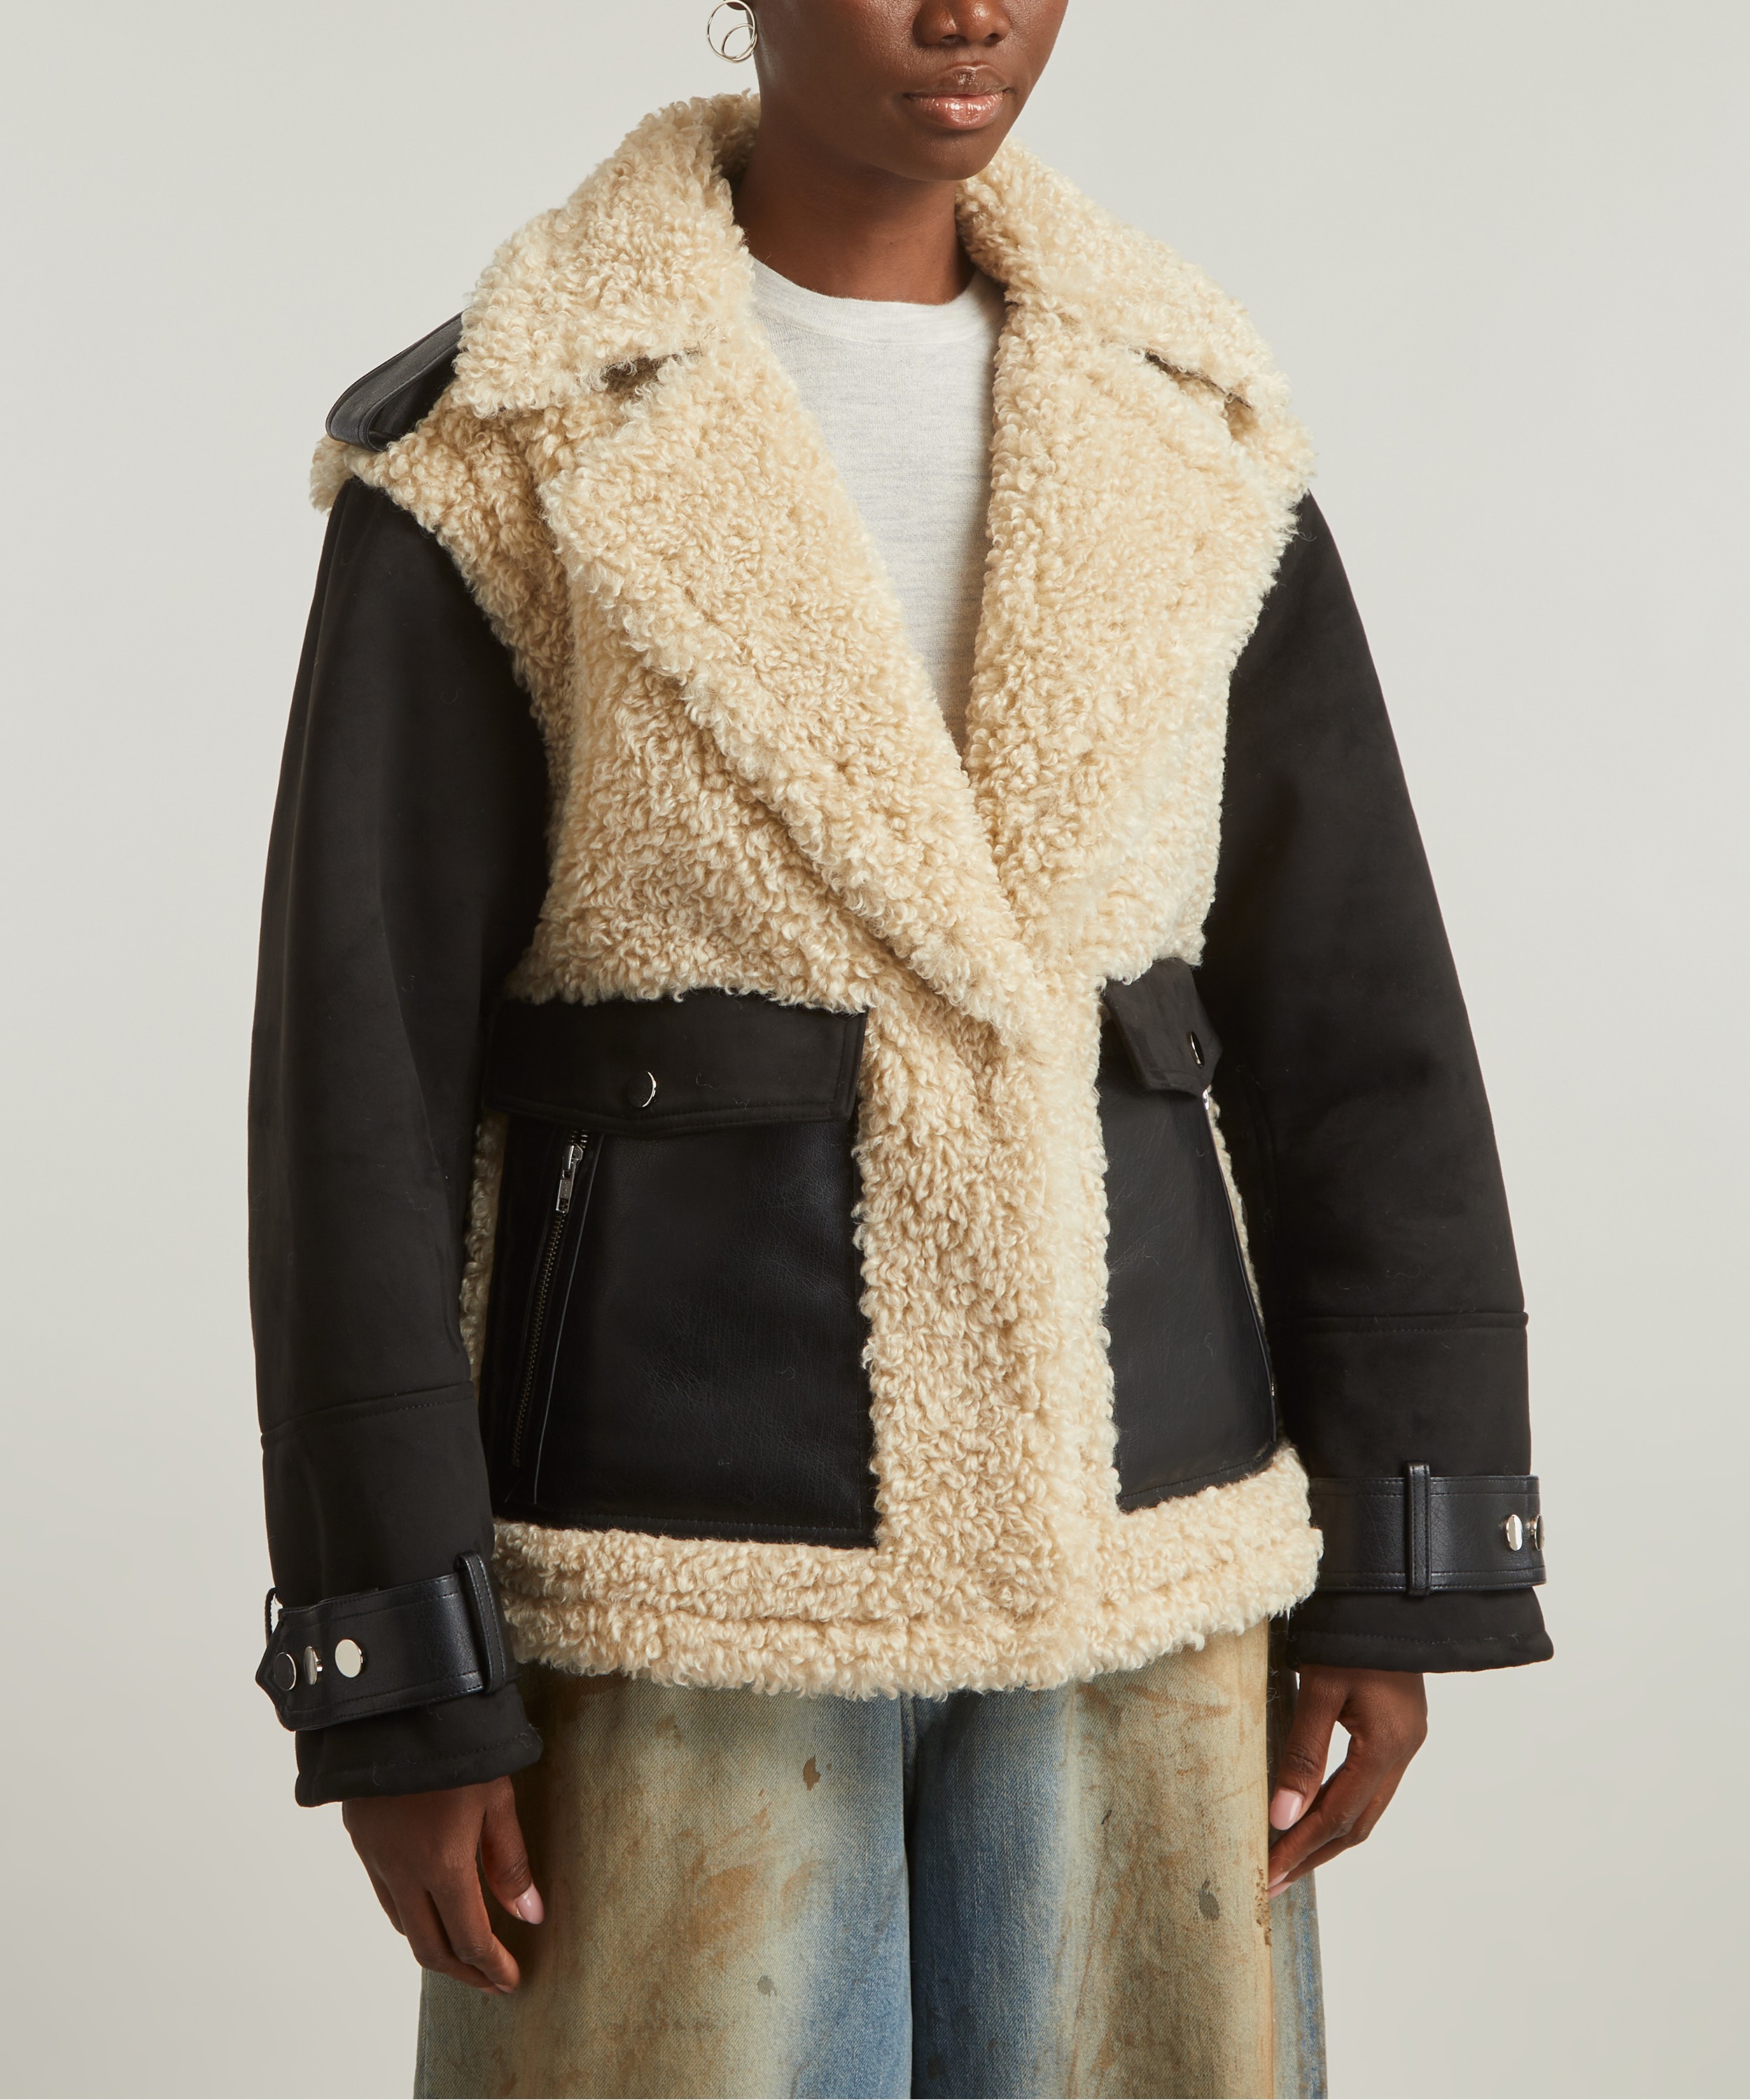 STAND STUDIO Charmaine Reversible Faux-Shearling Jacket | Liberty